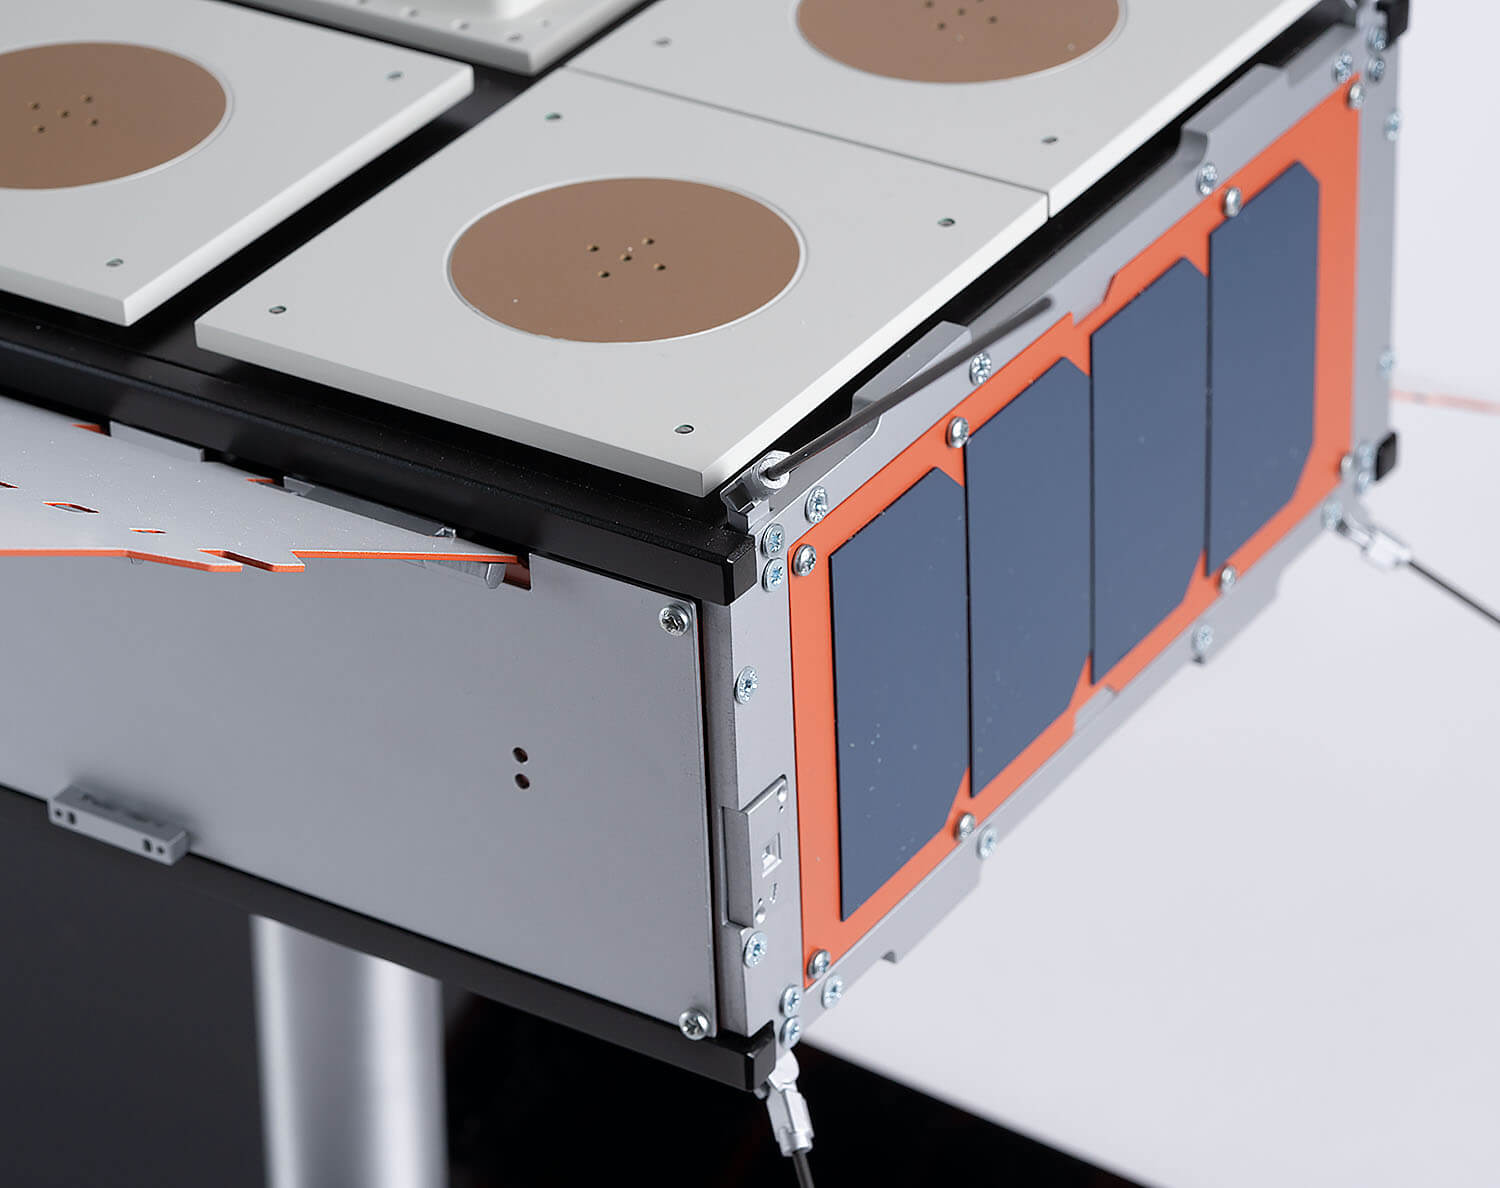 The Faraday satellite model for In-Space Missions was created by Crux Design Agency